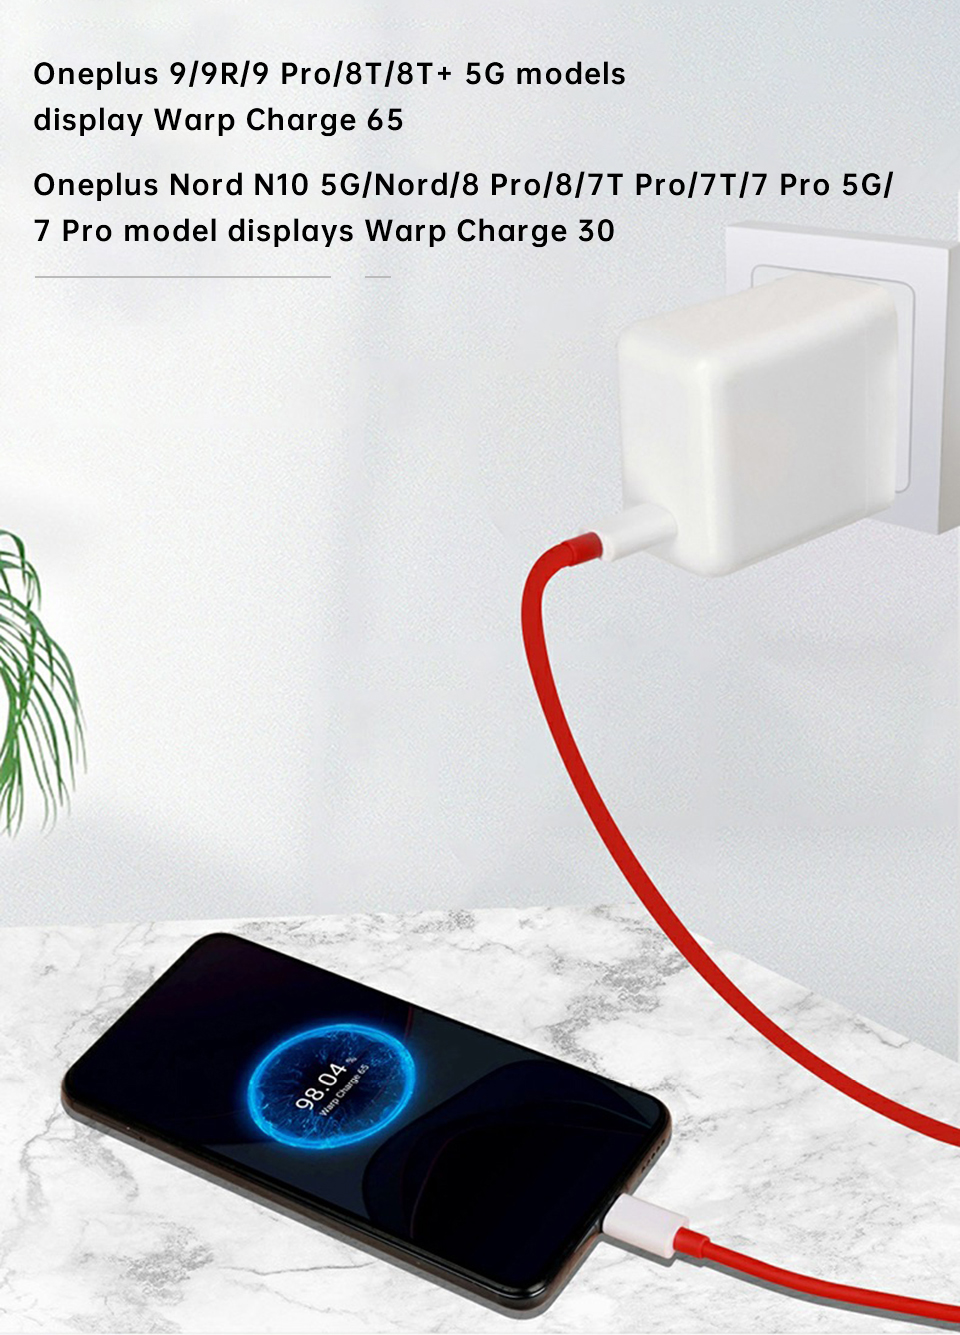 65W Warp Charge USB-C Charger Dash Warp Fast Charging Wall Charger Adapter EU Plug With 65W 6.5A Max USB-C to USB-C Cable For OnePlus 8T OnePlus 9 Pro For iPad Pro 2020 MacBook Air 2020 Mi 10 Huawei P40